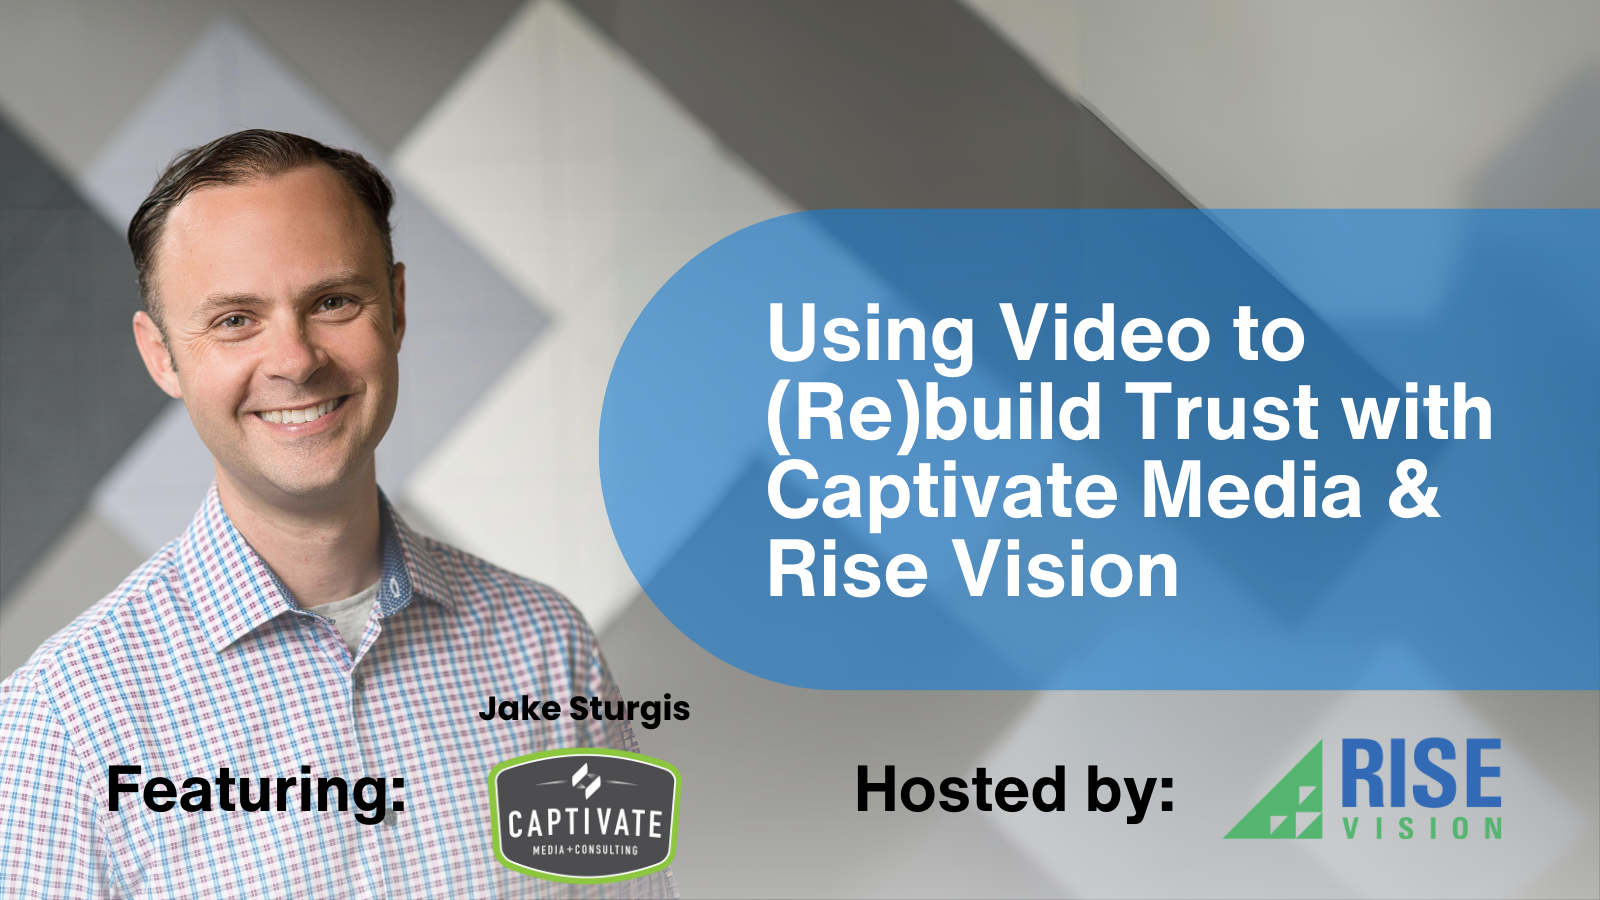 Press Release: Rise Vision and Captivate Media Partner for “Using Video to (Re)build Trust” Webinar